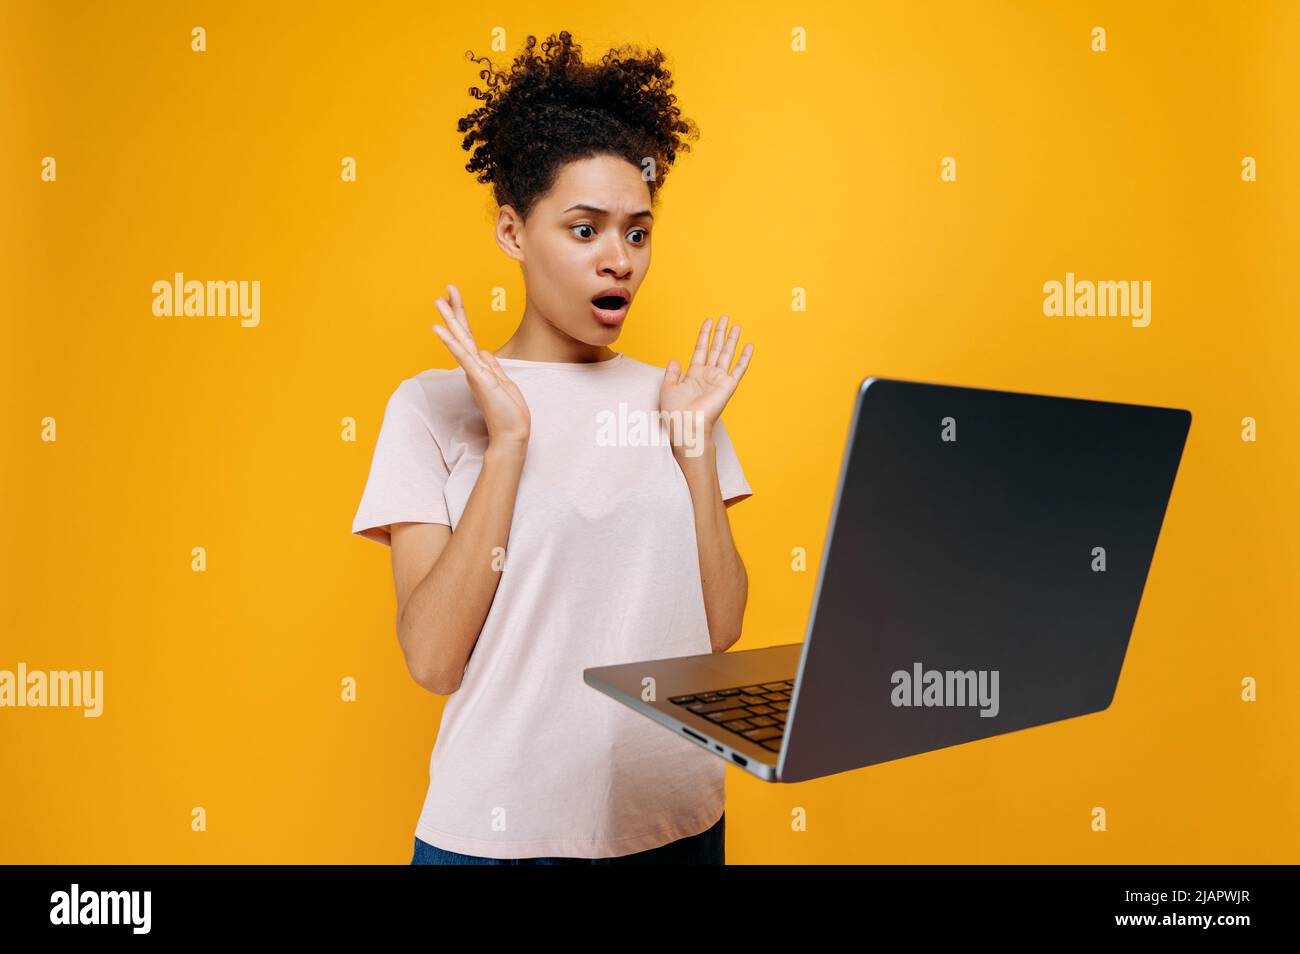 Stunned shocked african american girl, in a t-shirt, with curly hair, looks in surprise at the laptop screen, gesticulates with her hands, saw the unexpected news, stands on isolated orange background Stock Photo